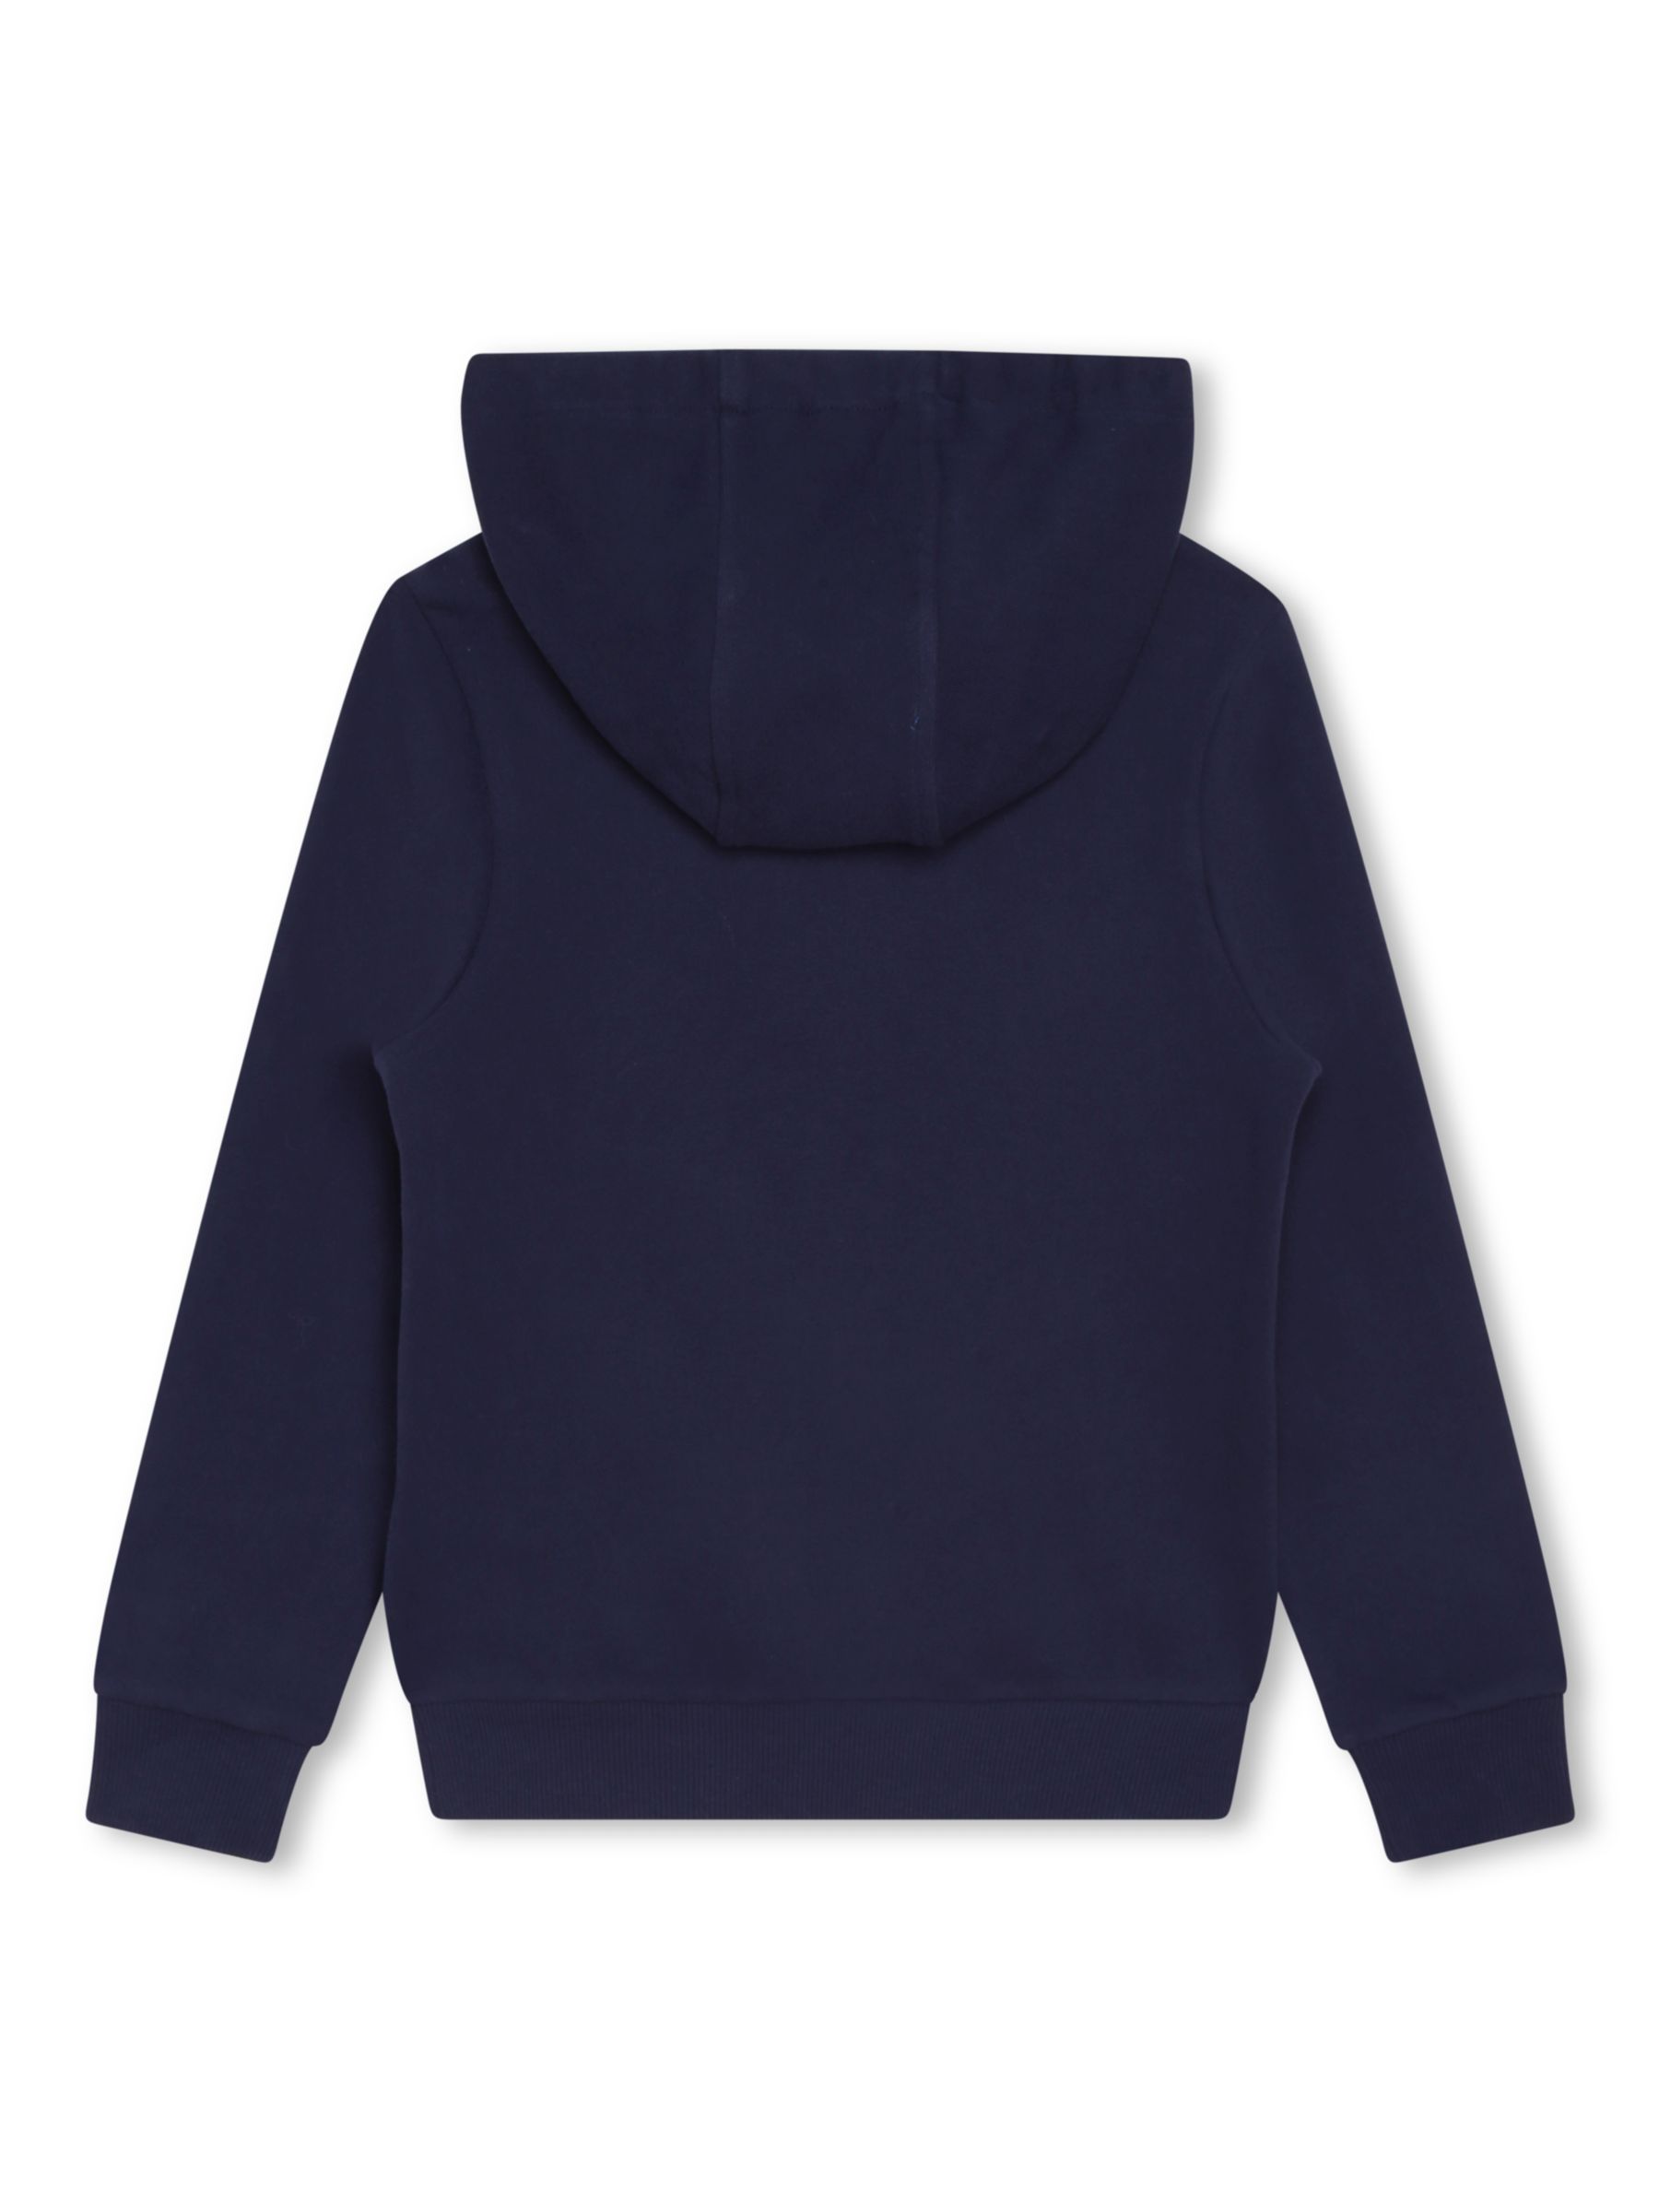 Buy Timberland Kids' Logo Embroidered Hoodie, Navy/White Online at johnlewis.com